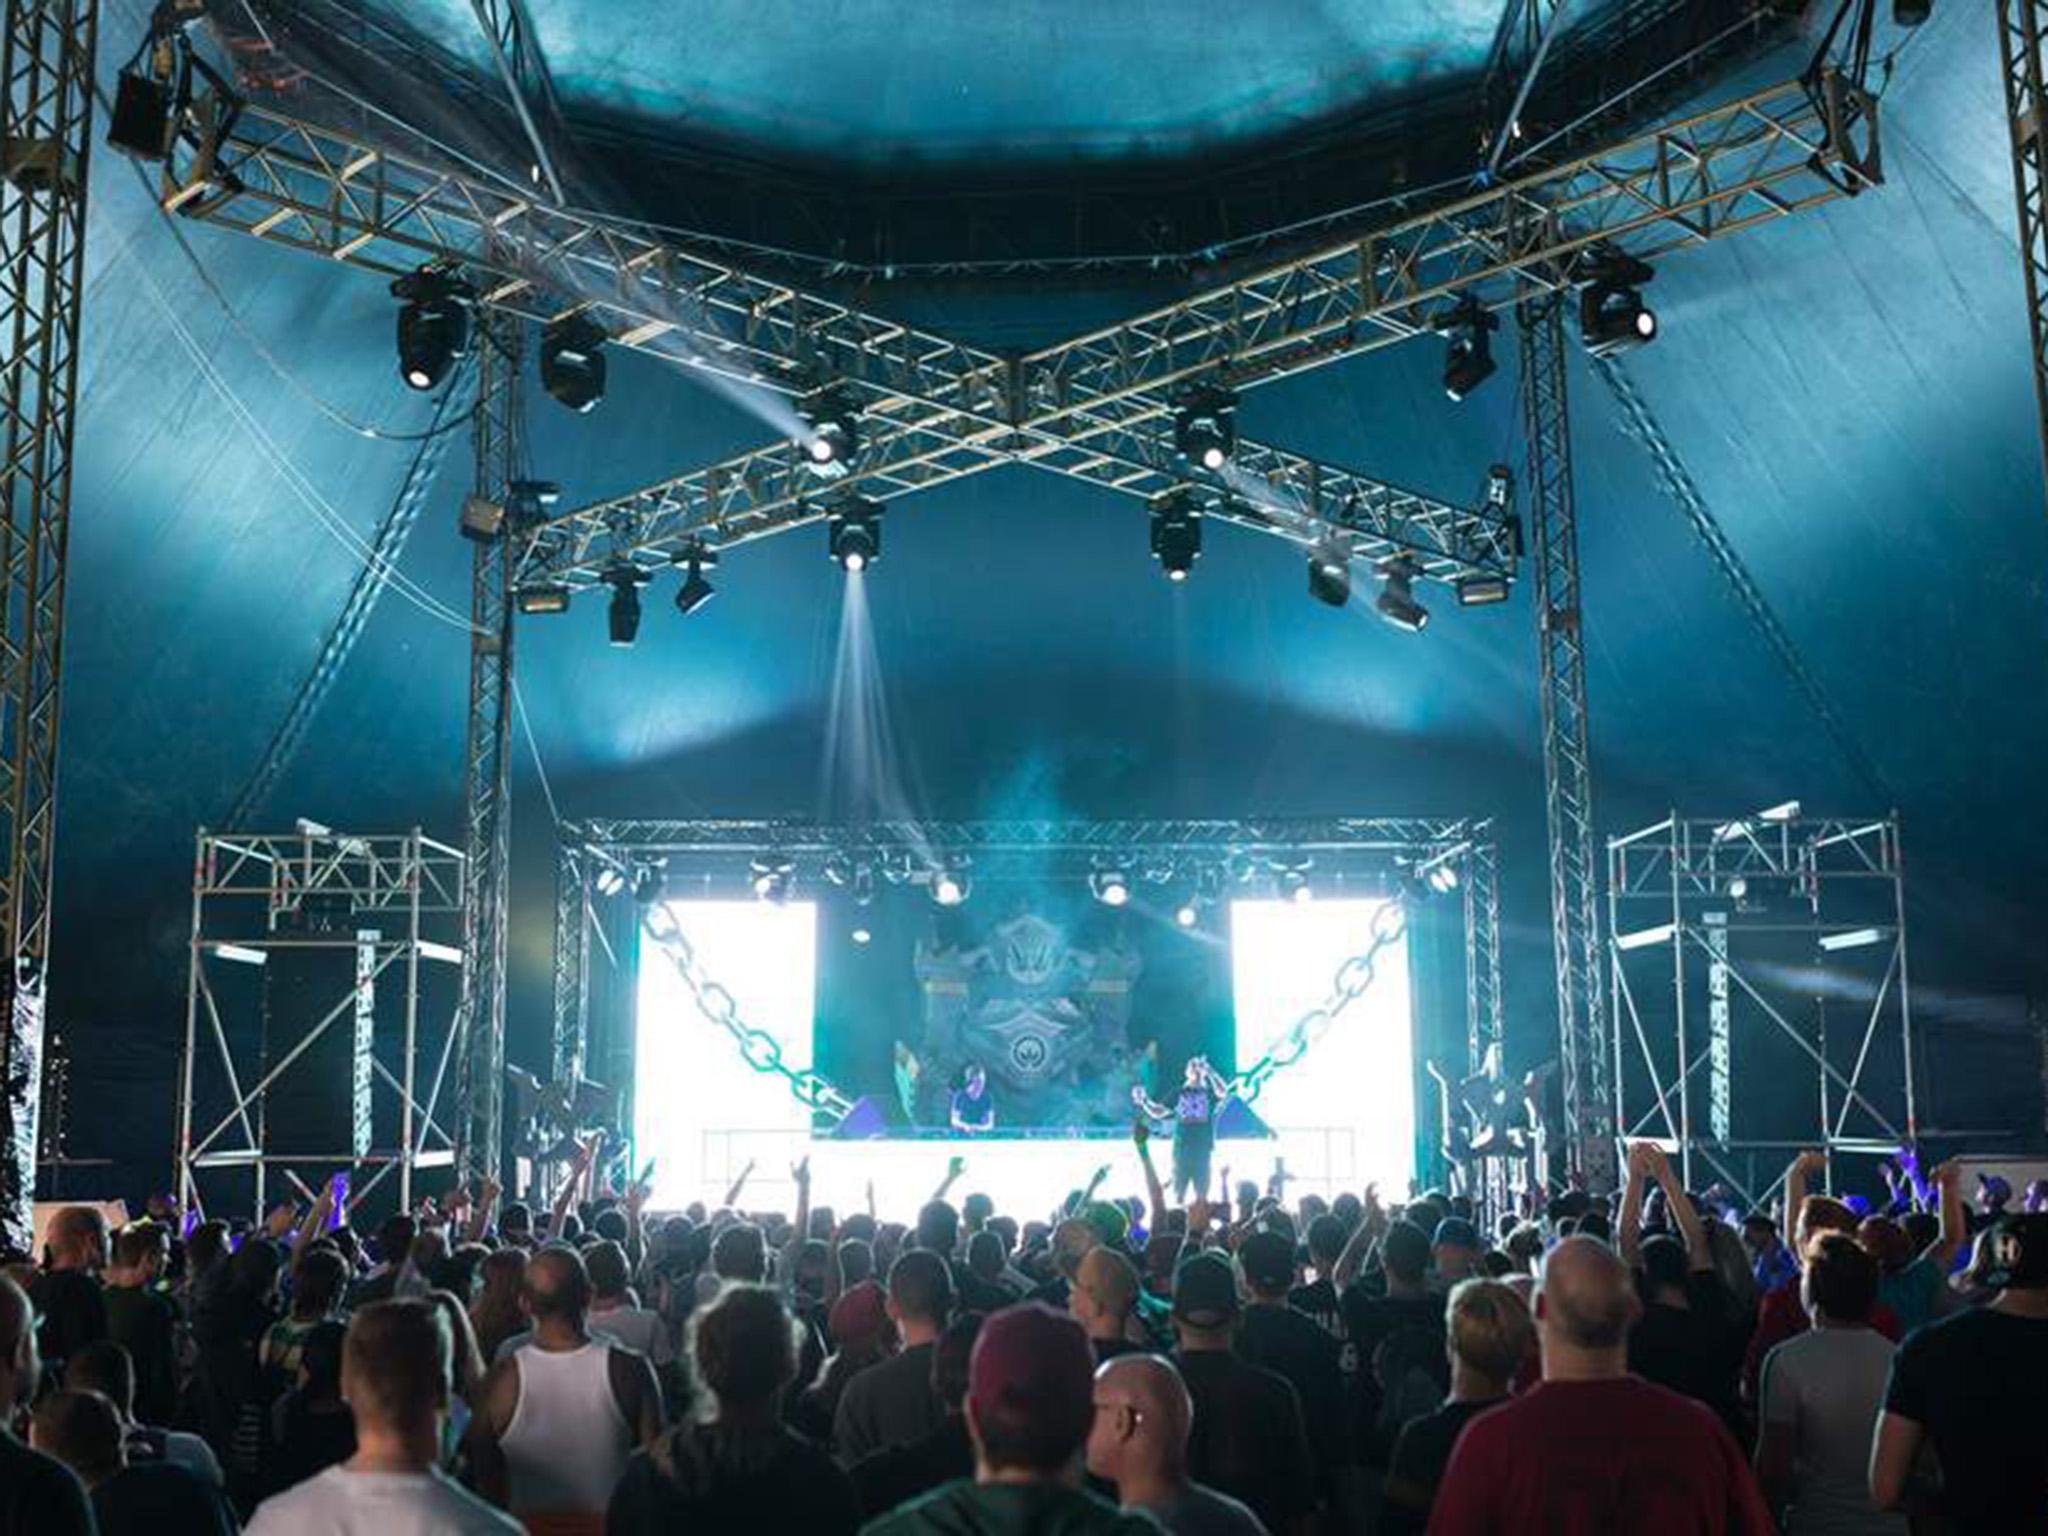 Despite Hospitality Records having its roots in the South West London’s drum and bass scene, it's festival was anything but limited to city limits